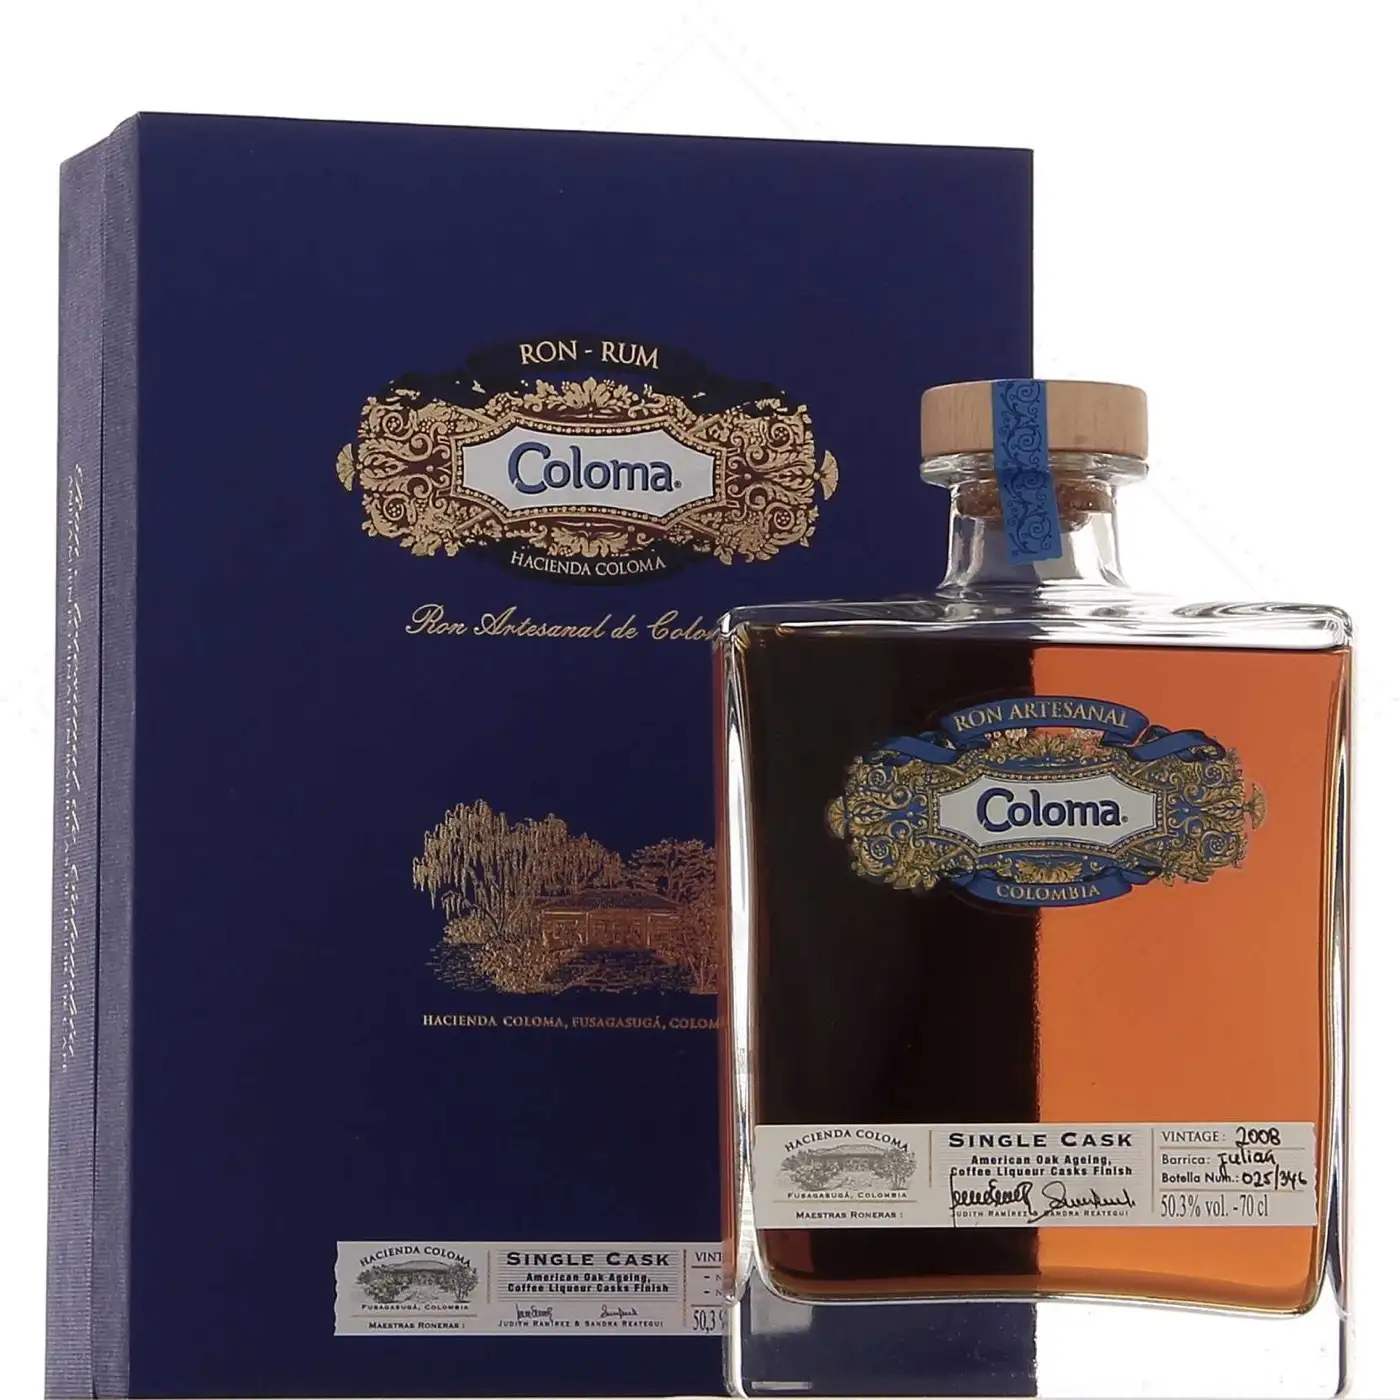 Image of the front of the bottle of the rum Hacienda Coloma